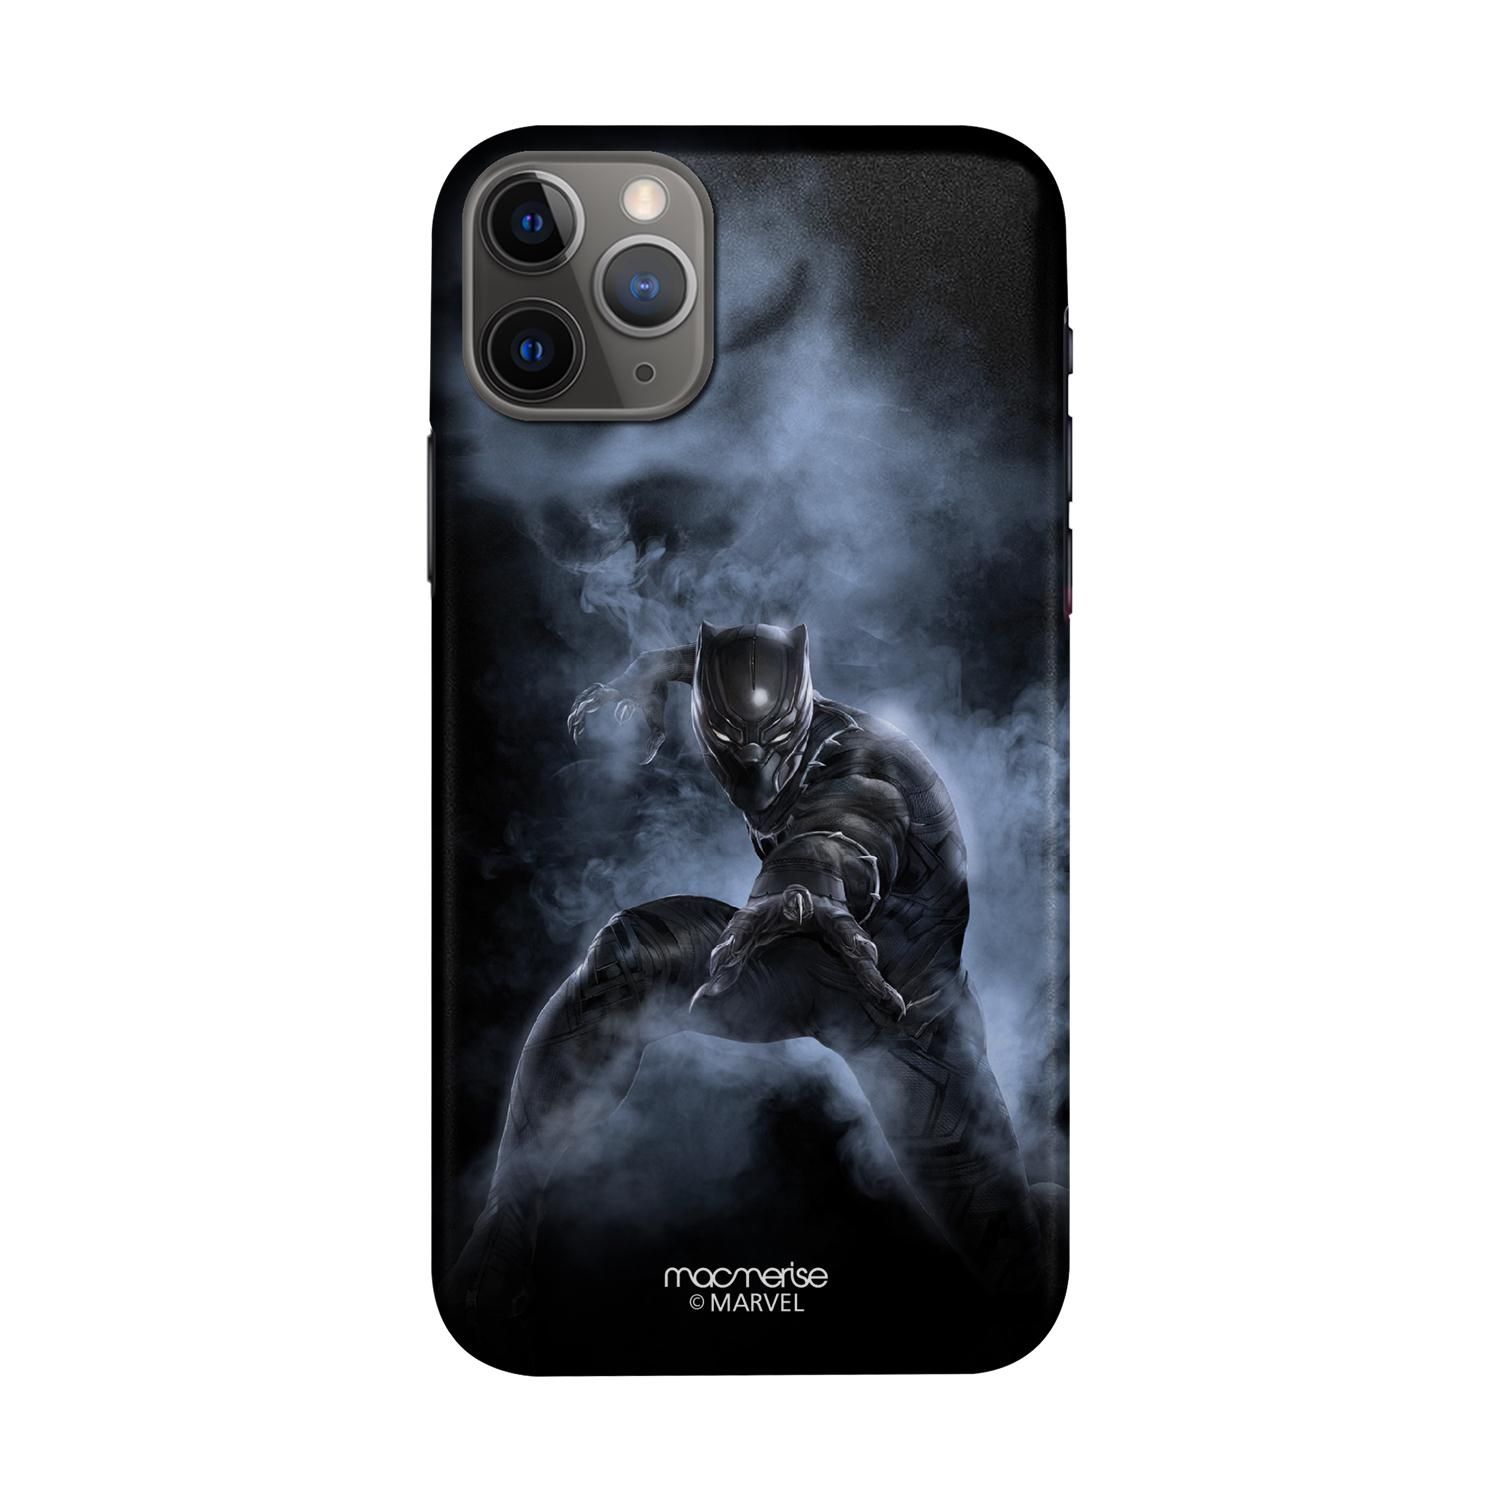 Buy Black Panther Attack - Sleek Phone Case for iPhone 11 Pro Max Online